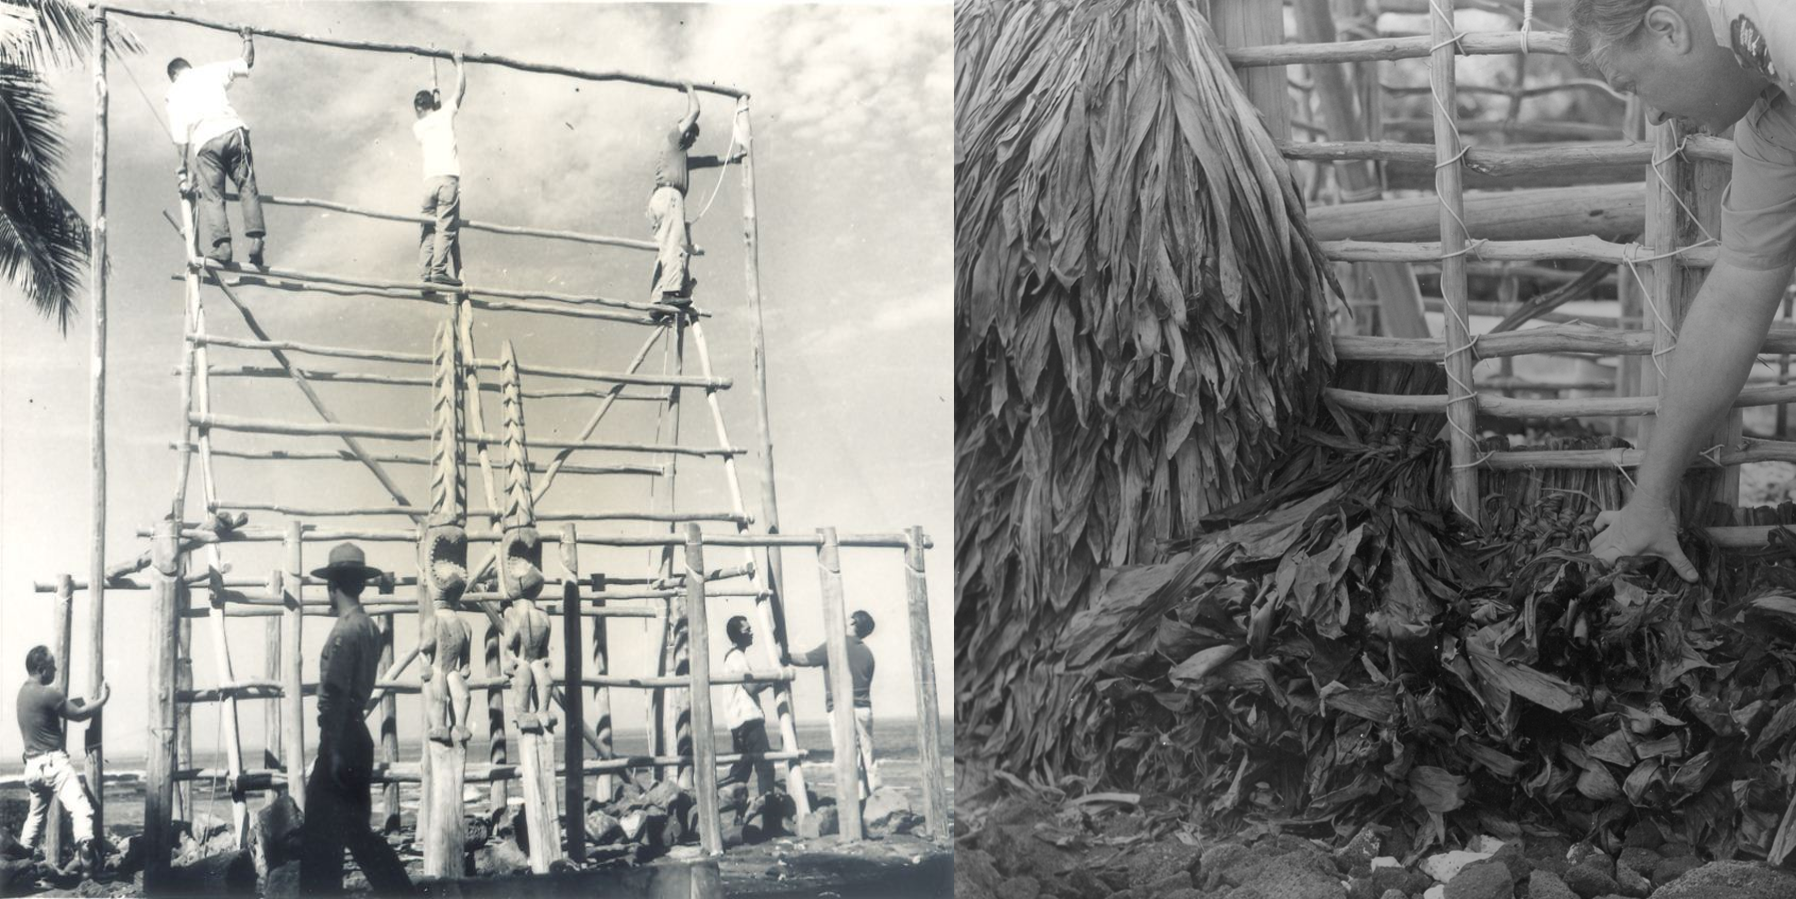 Two photos: 1) Workers lash frame of Hale o Keawe 2) Worker uses ti leaves to thatch the walls of Hale o Keawe